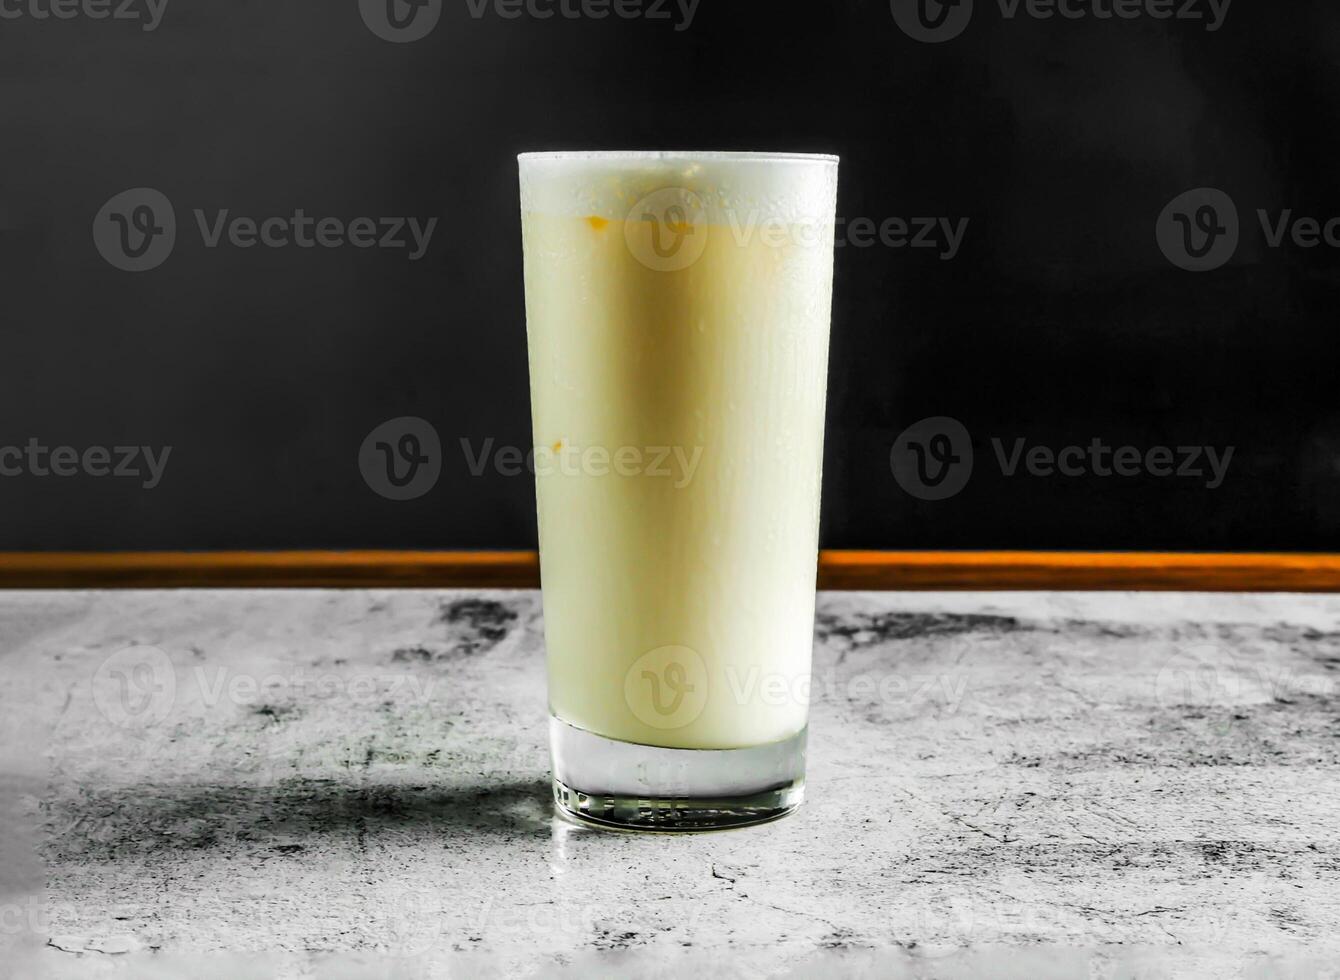 sweet lassi with yogurt, sugar, water and ice served in glass side view on grey background drink photo